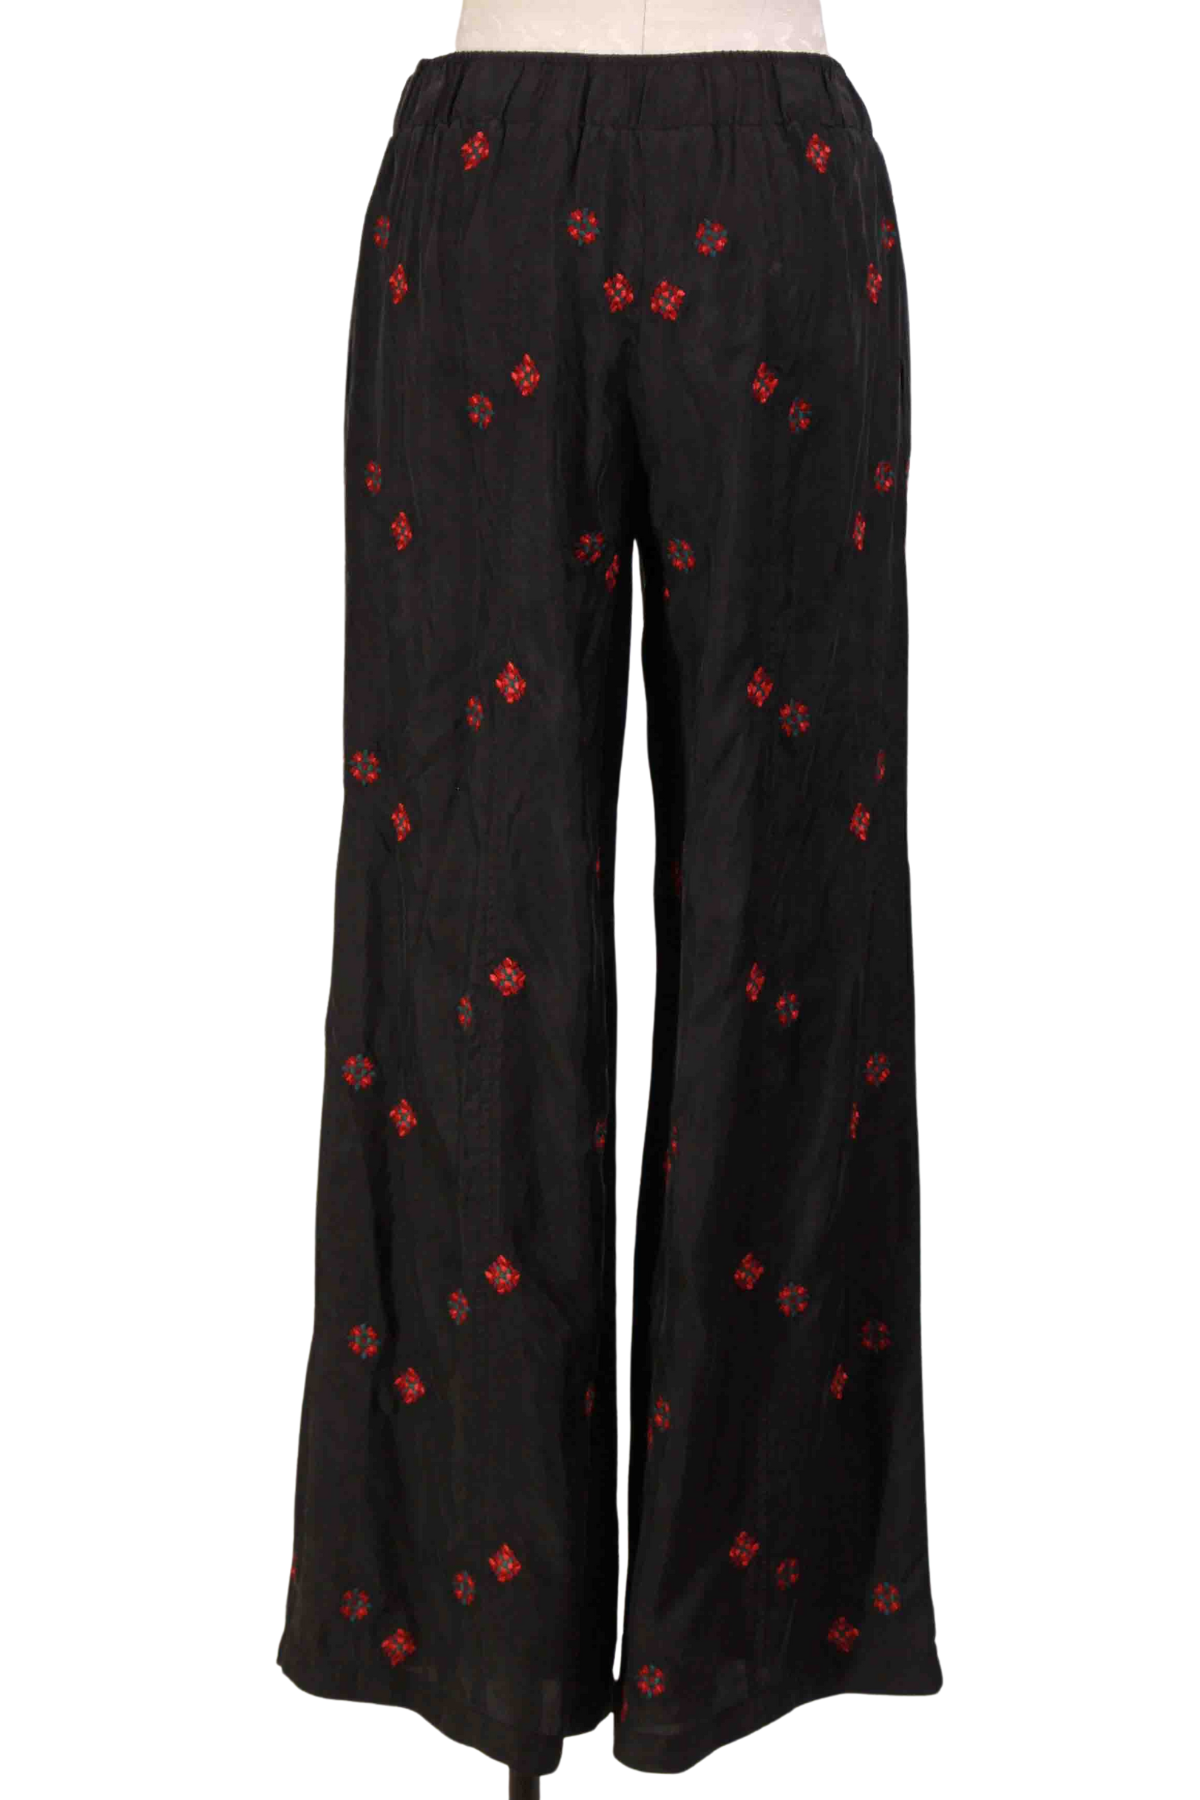 back view of black Maxine Seamed Wide Leg Pant by Johnny Was